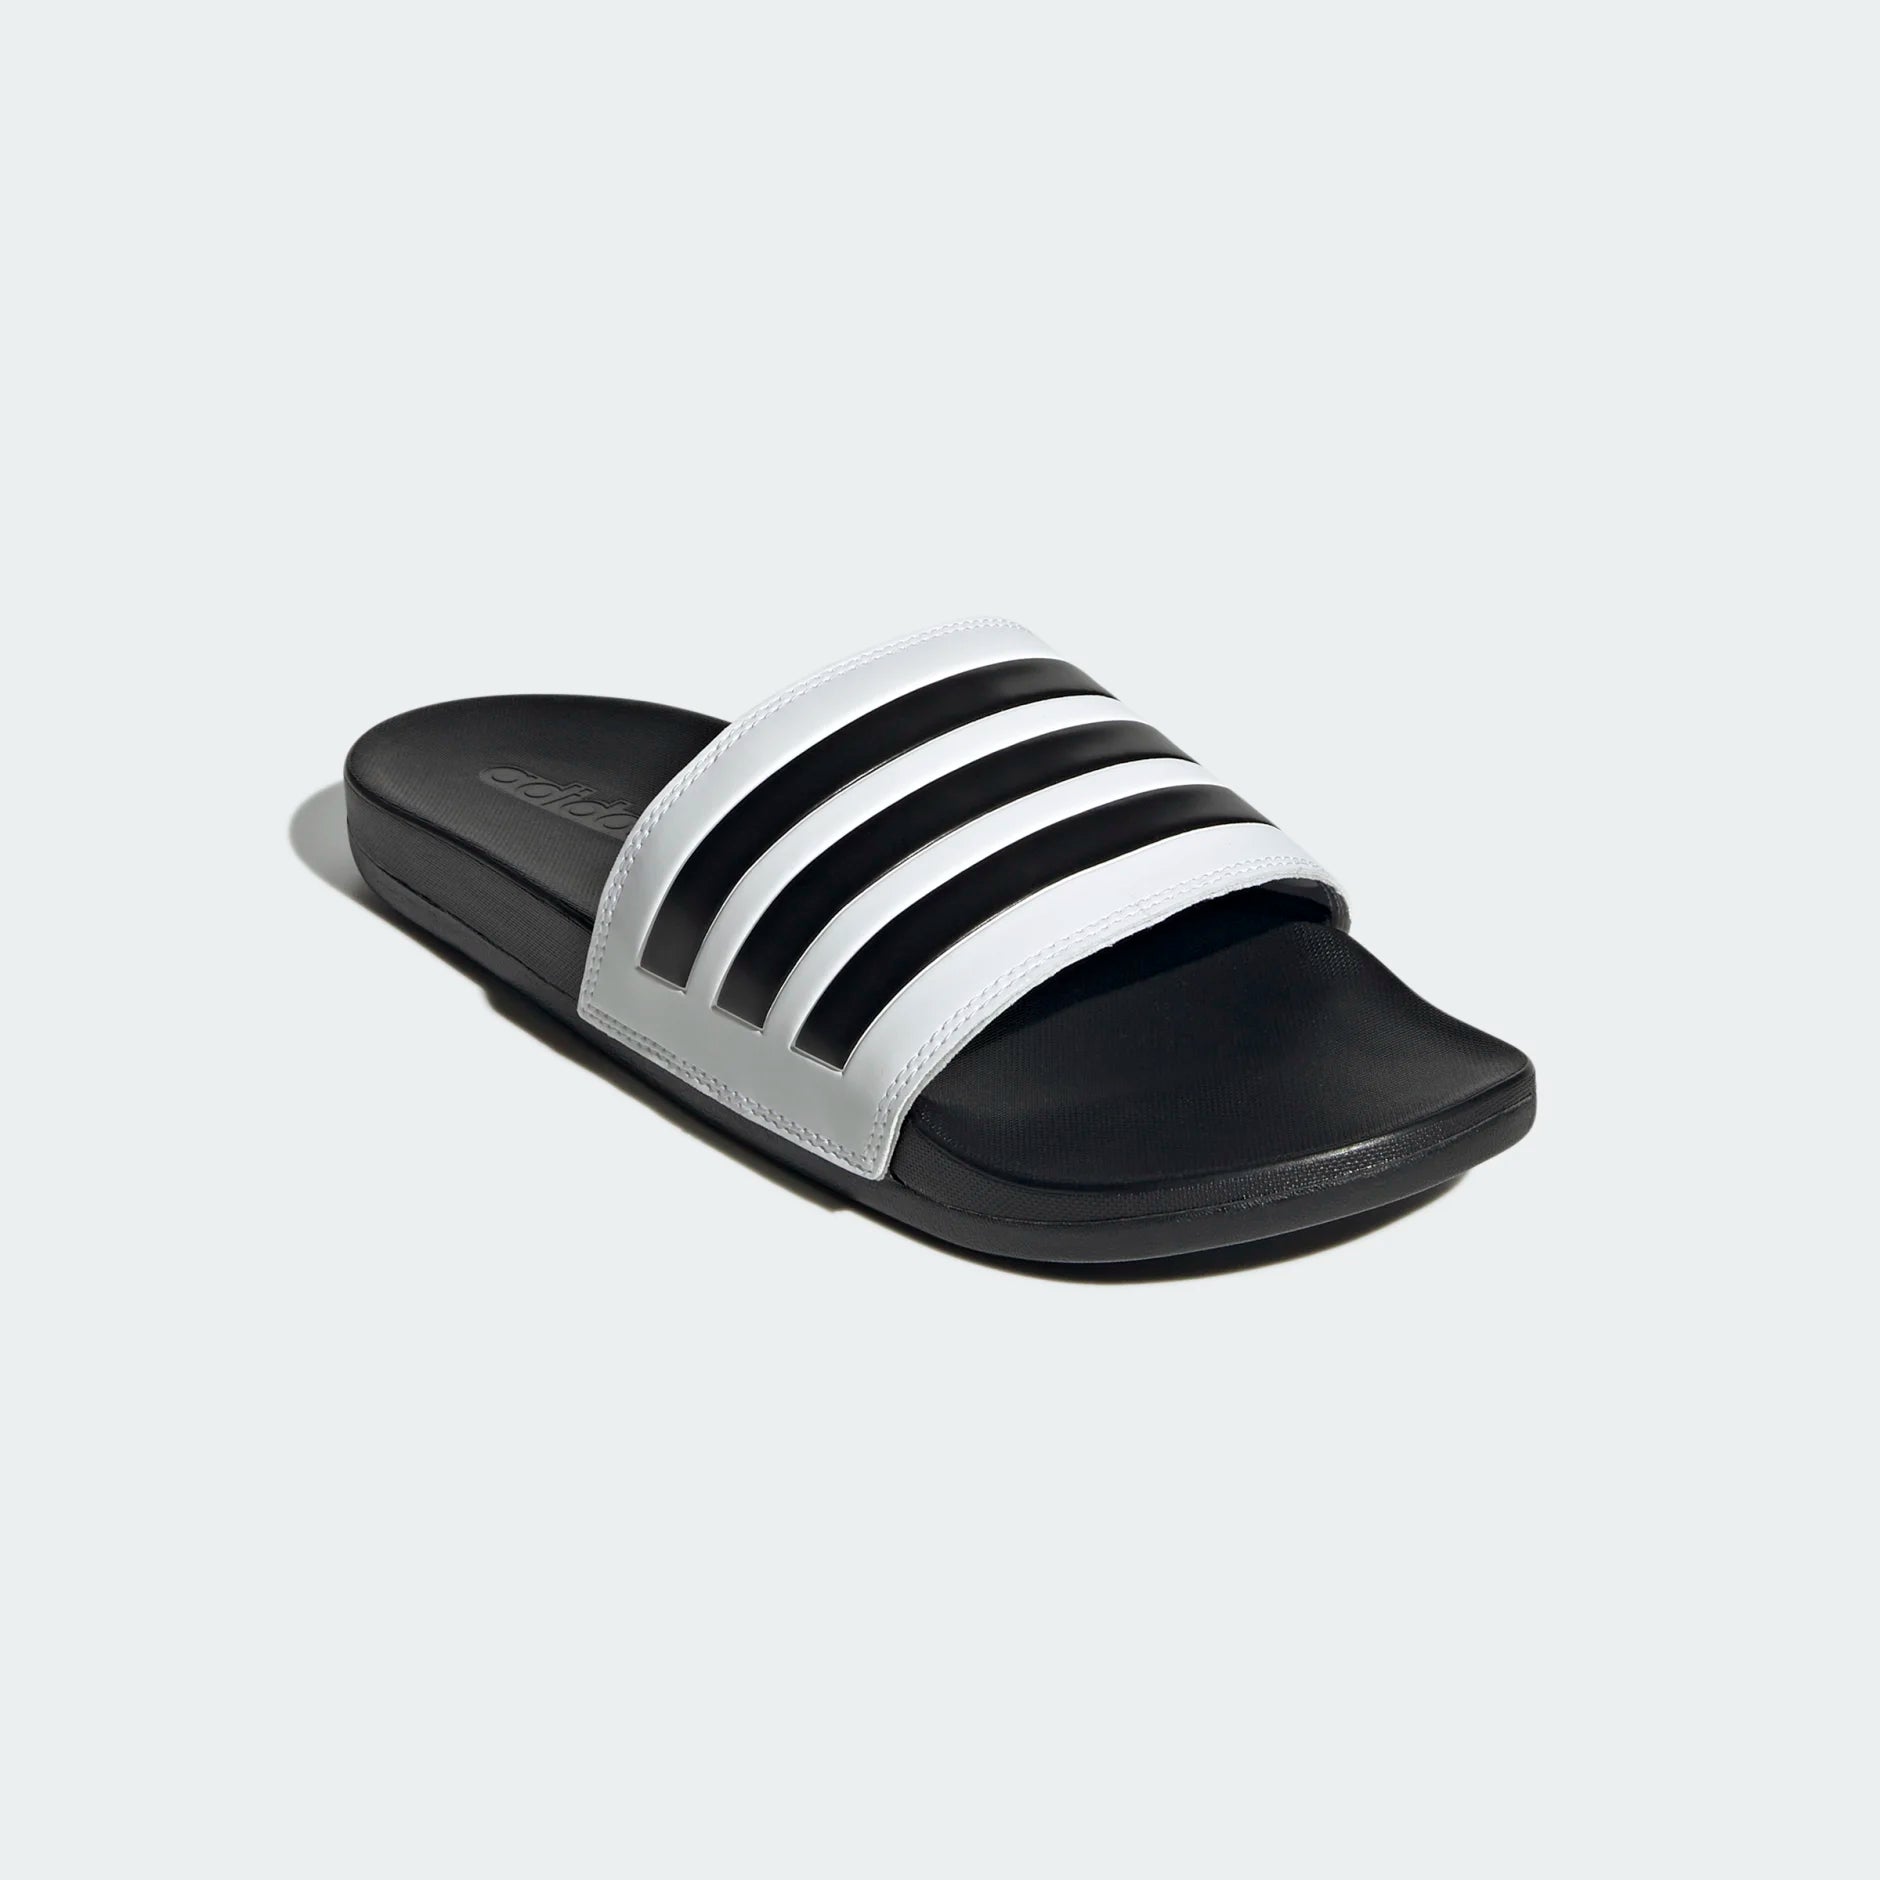 Whether you're heading to the locker room after a soccer game or at home recovering on the couch, these adidas slides keep your feet wrapped in lightweight comfort. Pair them with socks and shorts for your post-workout look or with your favorite swimwear for the ultimate beach vibe. The adidas 3-Stripes design completes your sport style.